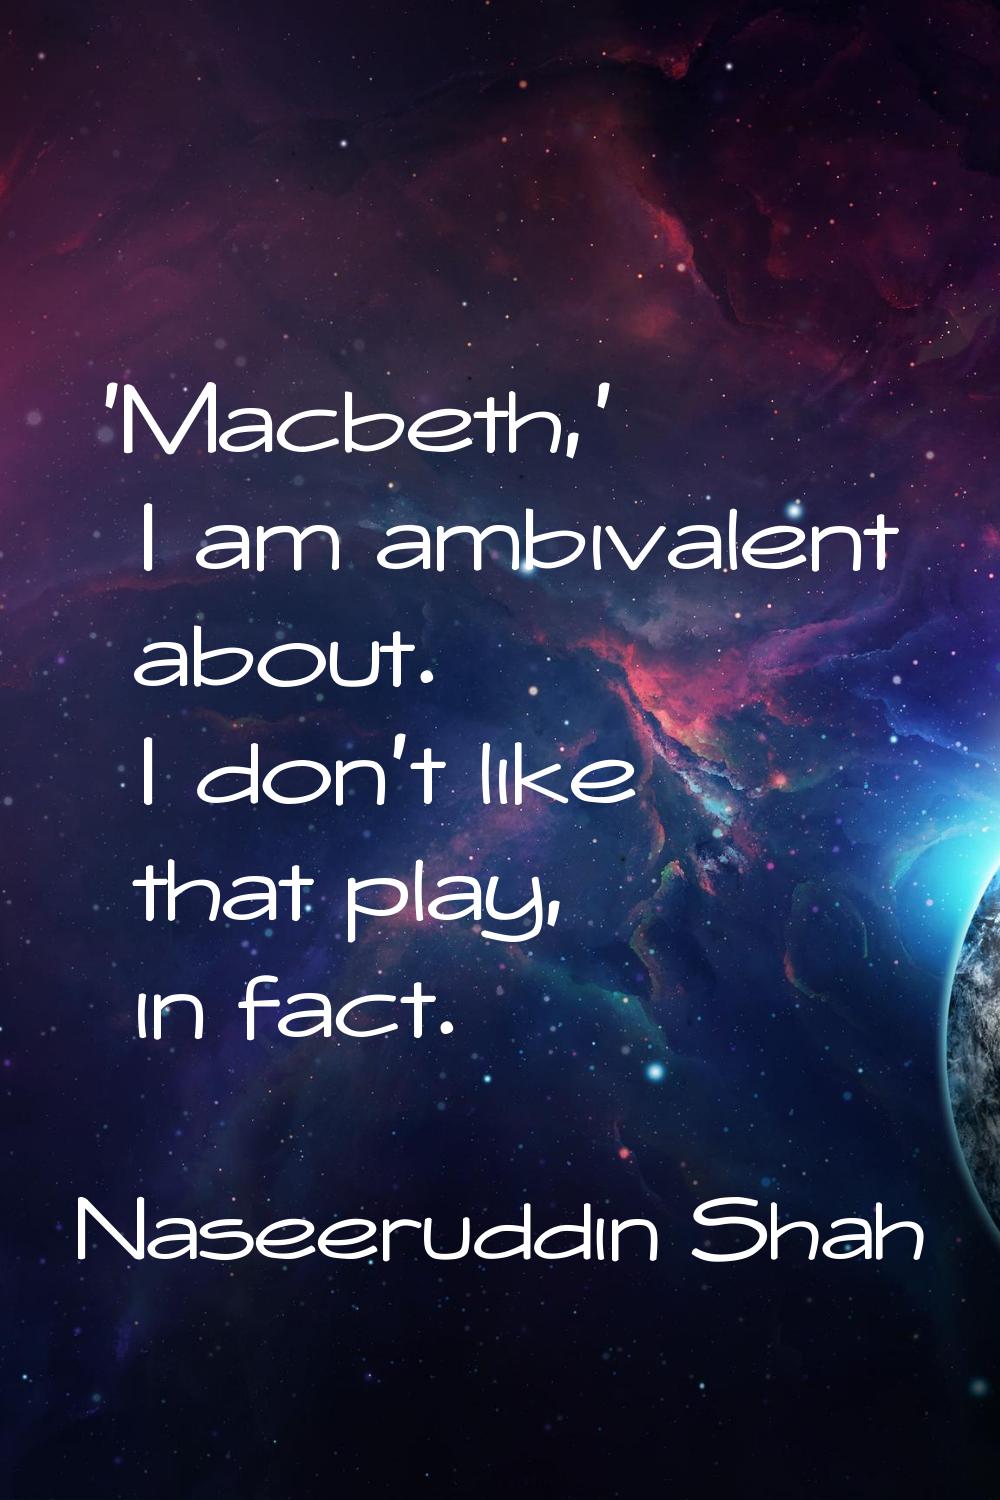 'Macbeth,' I am ambivalent about. I don't like that play, in fact.